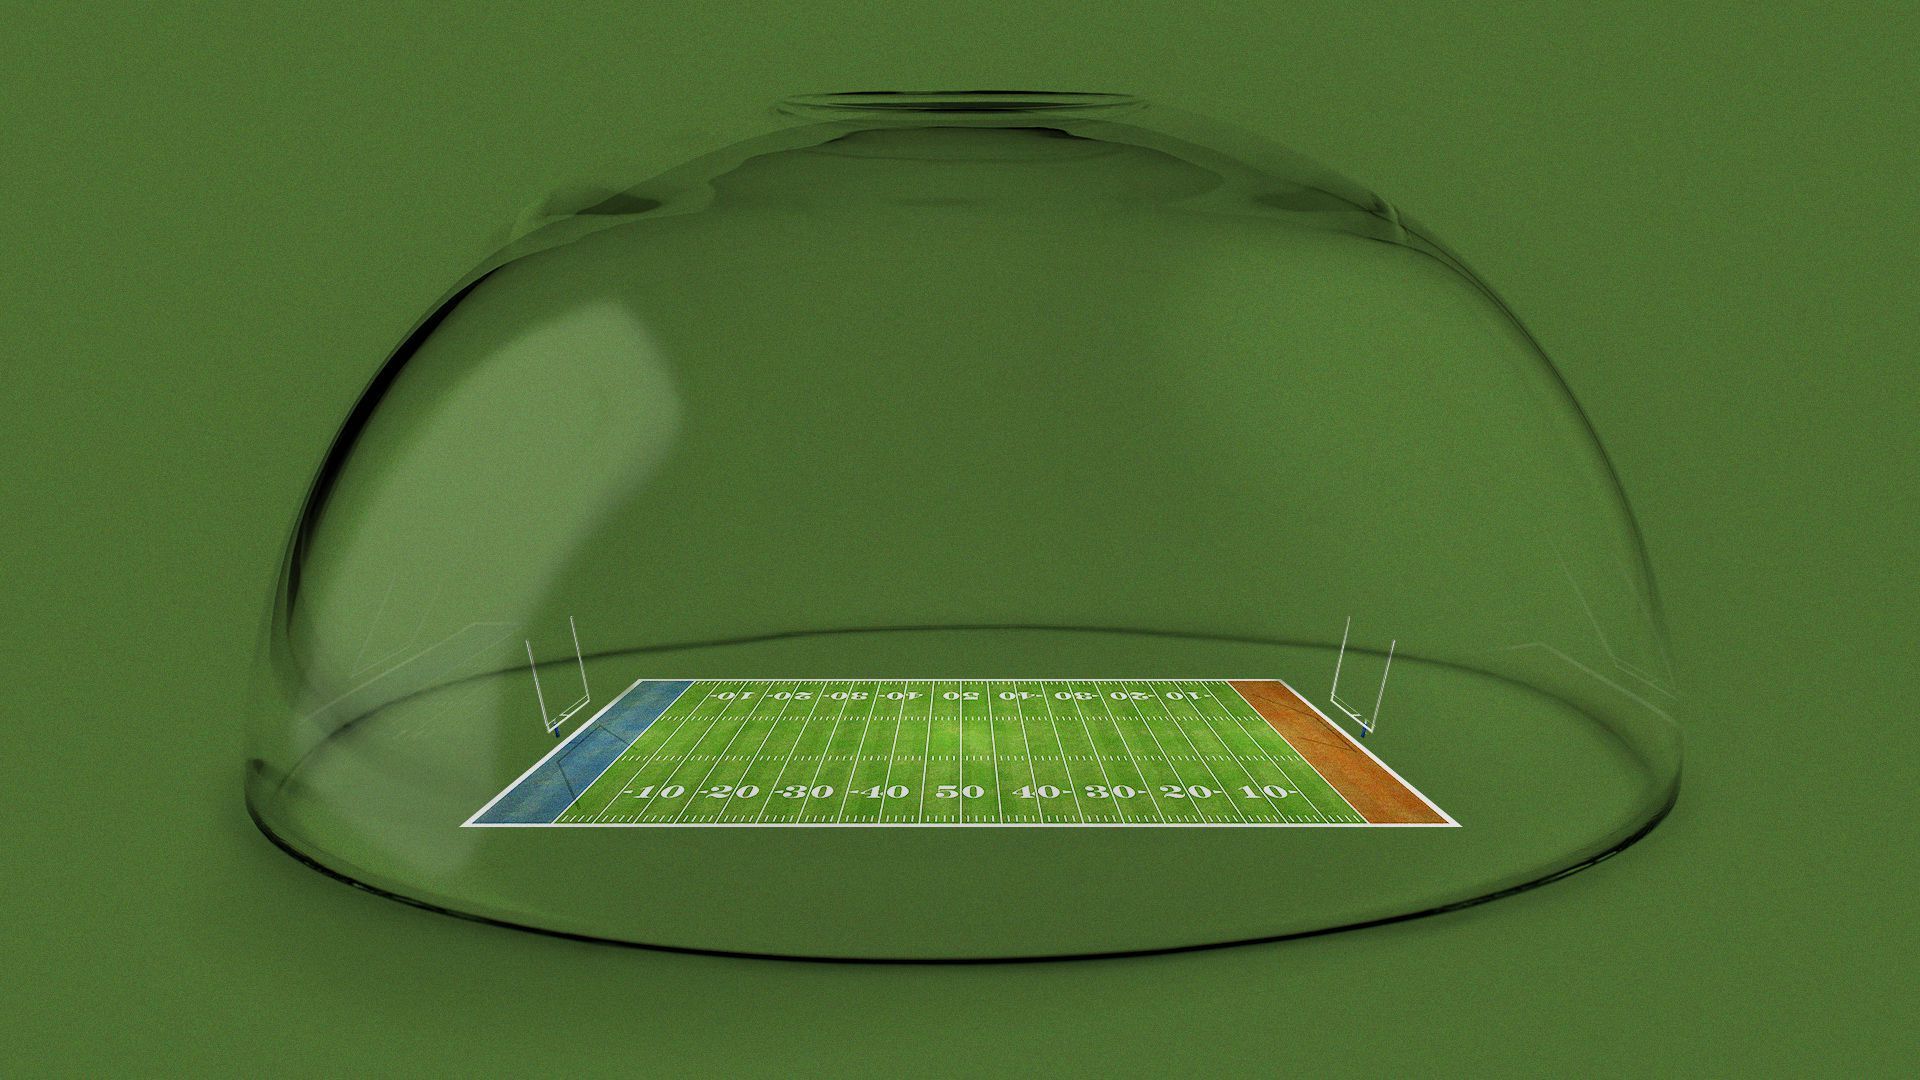 An illustration of a dome with a football field